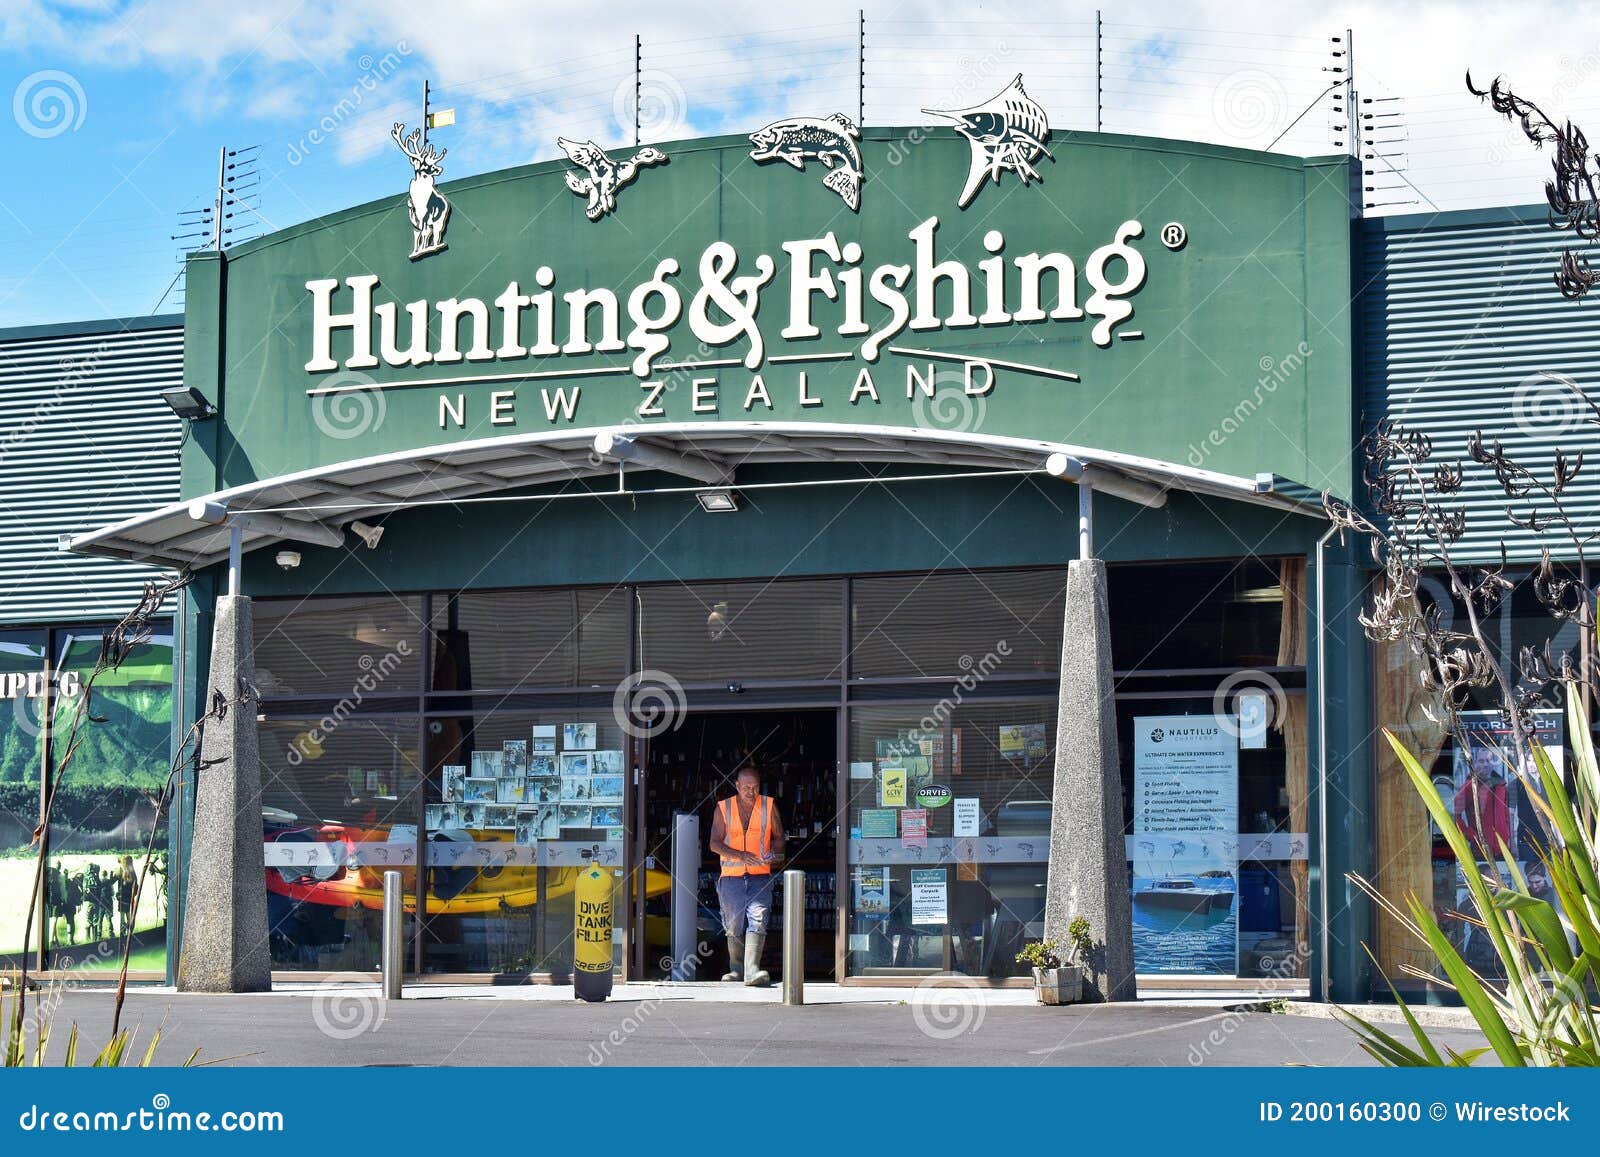 Hunting & Fishing New Zealand Offers Fishing Equipment, Knives and